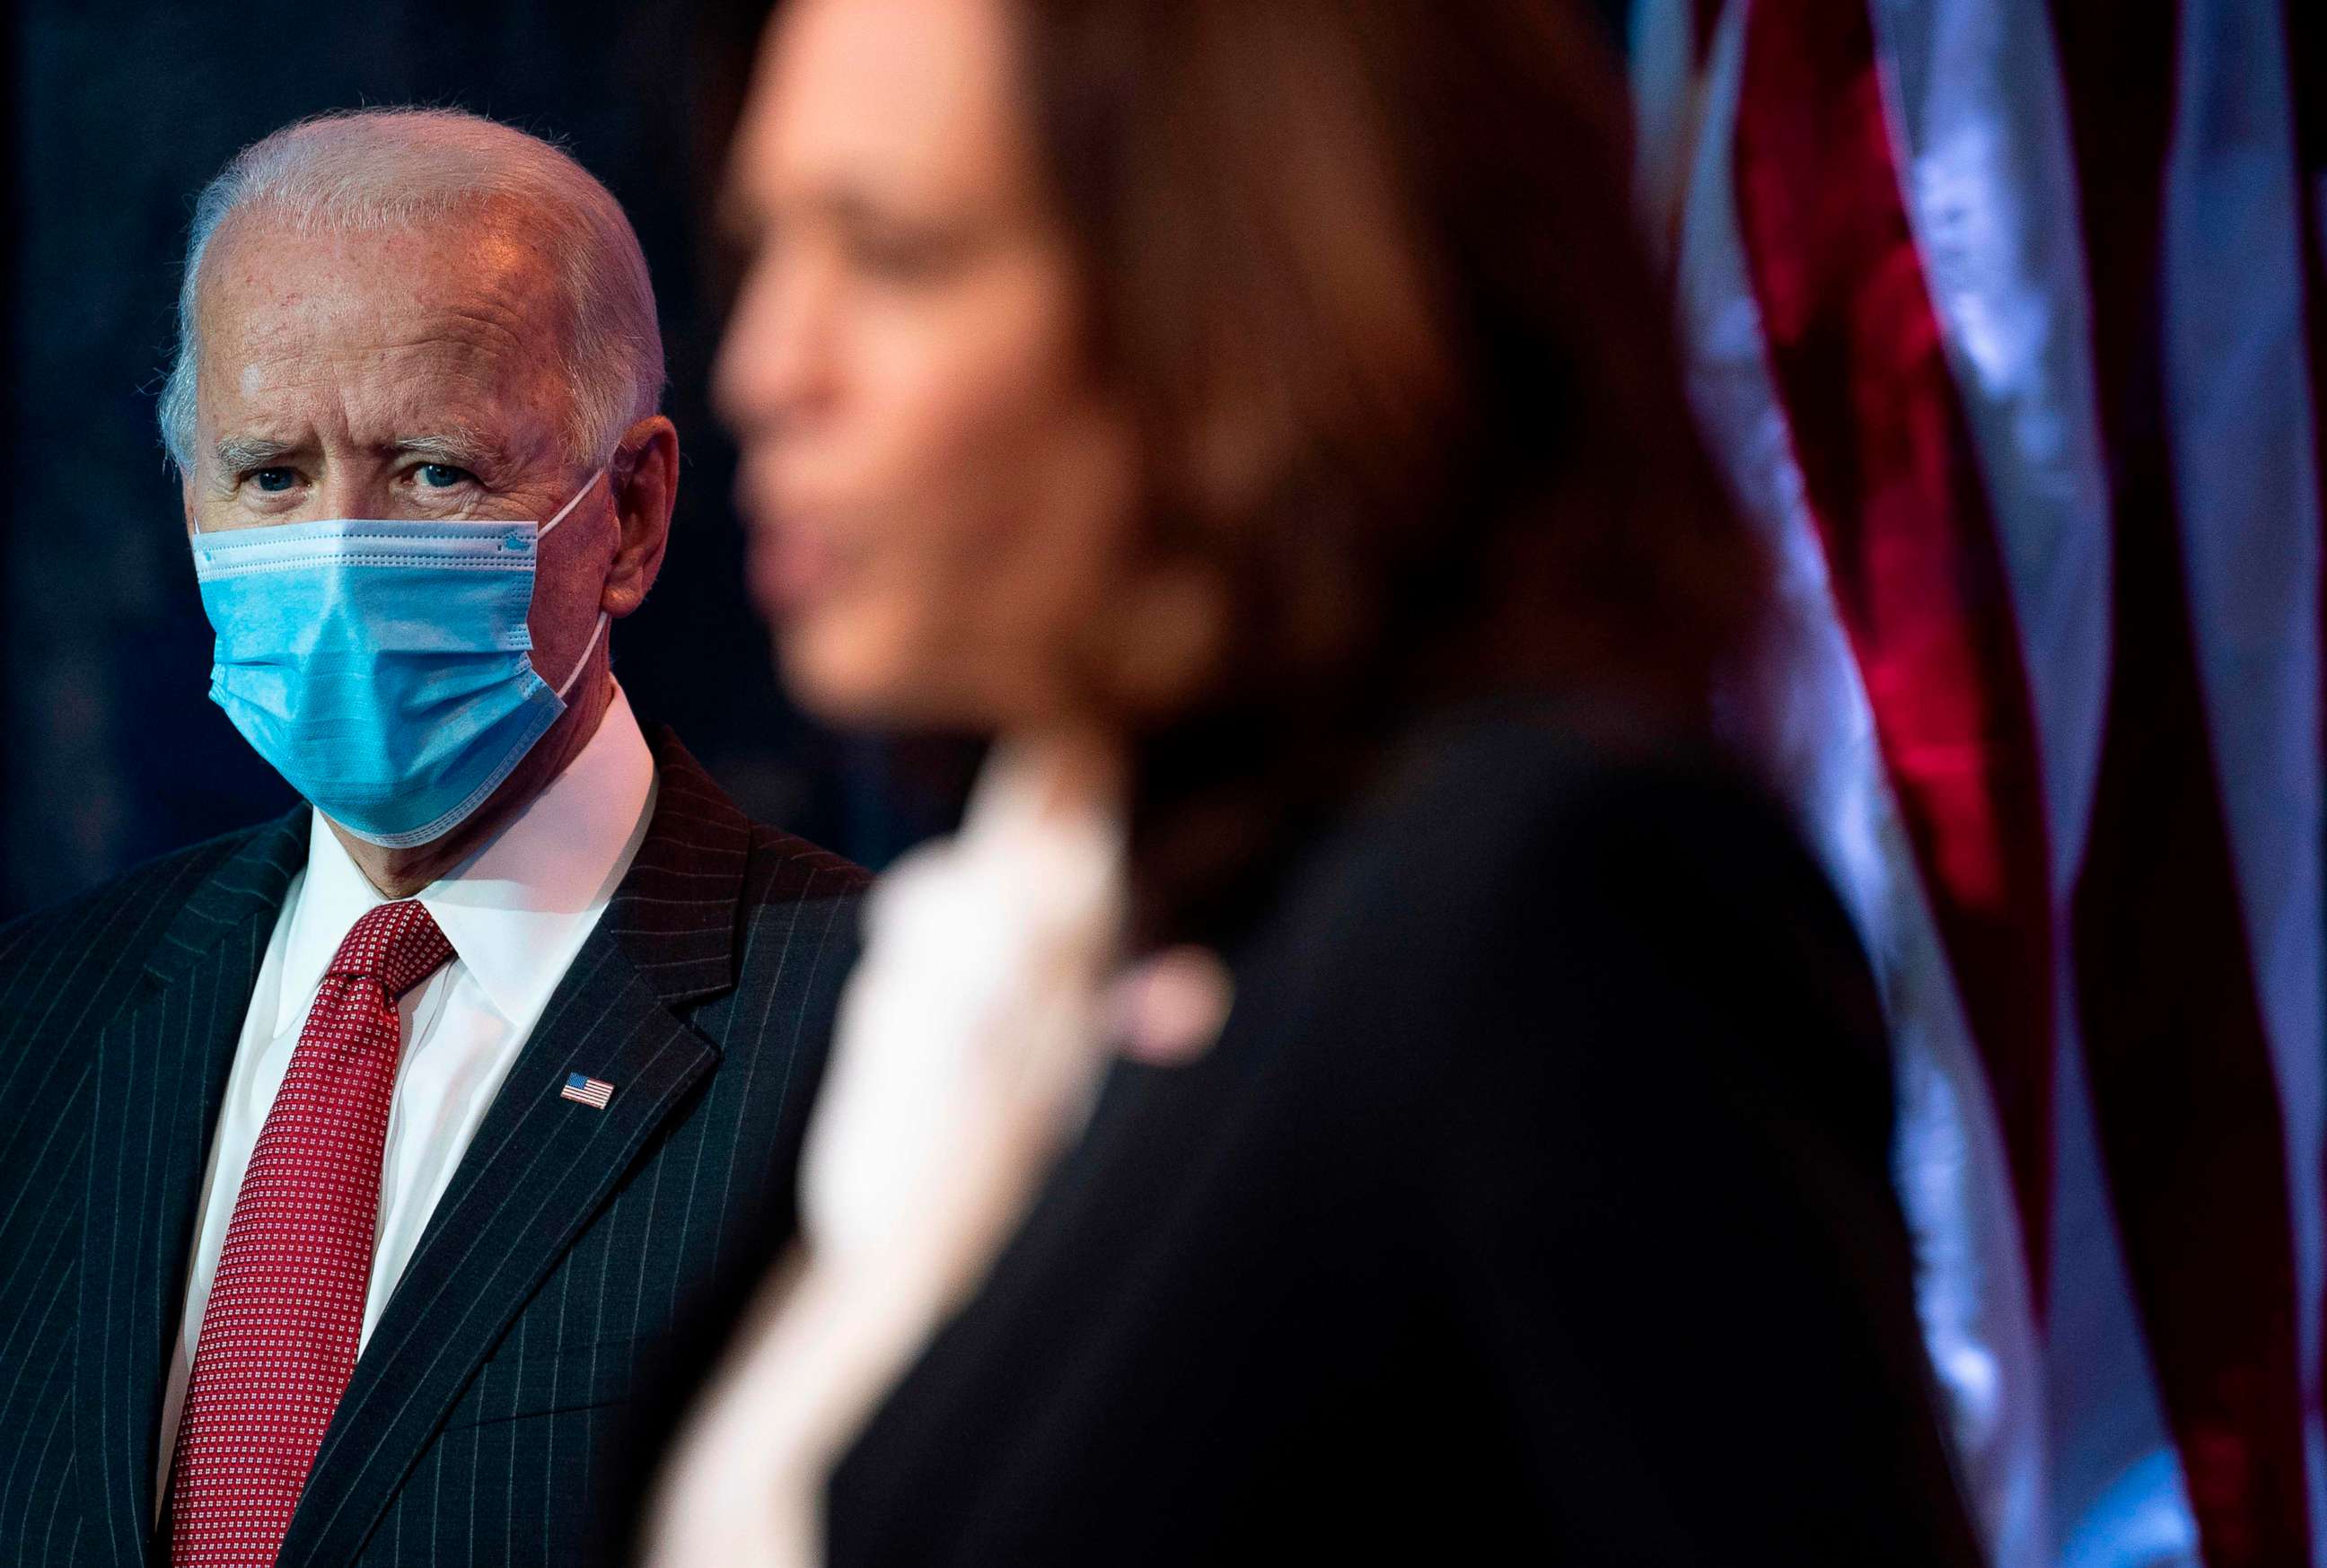 PHOTO: President-elect Joe Biden looks on as Vice president-elect Kamala Harris delivers remarks following a meeting with the Governors and Covid team on Nov. 19, 2020 in Wilmington, Del.